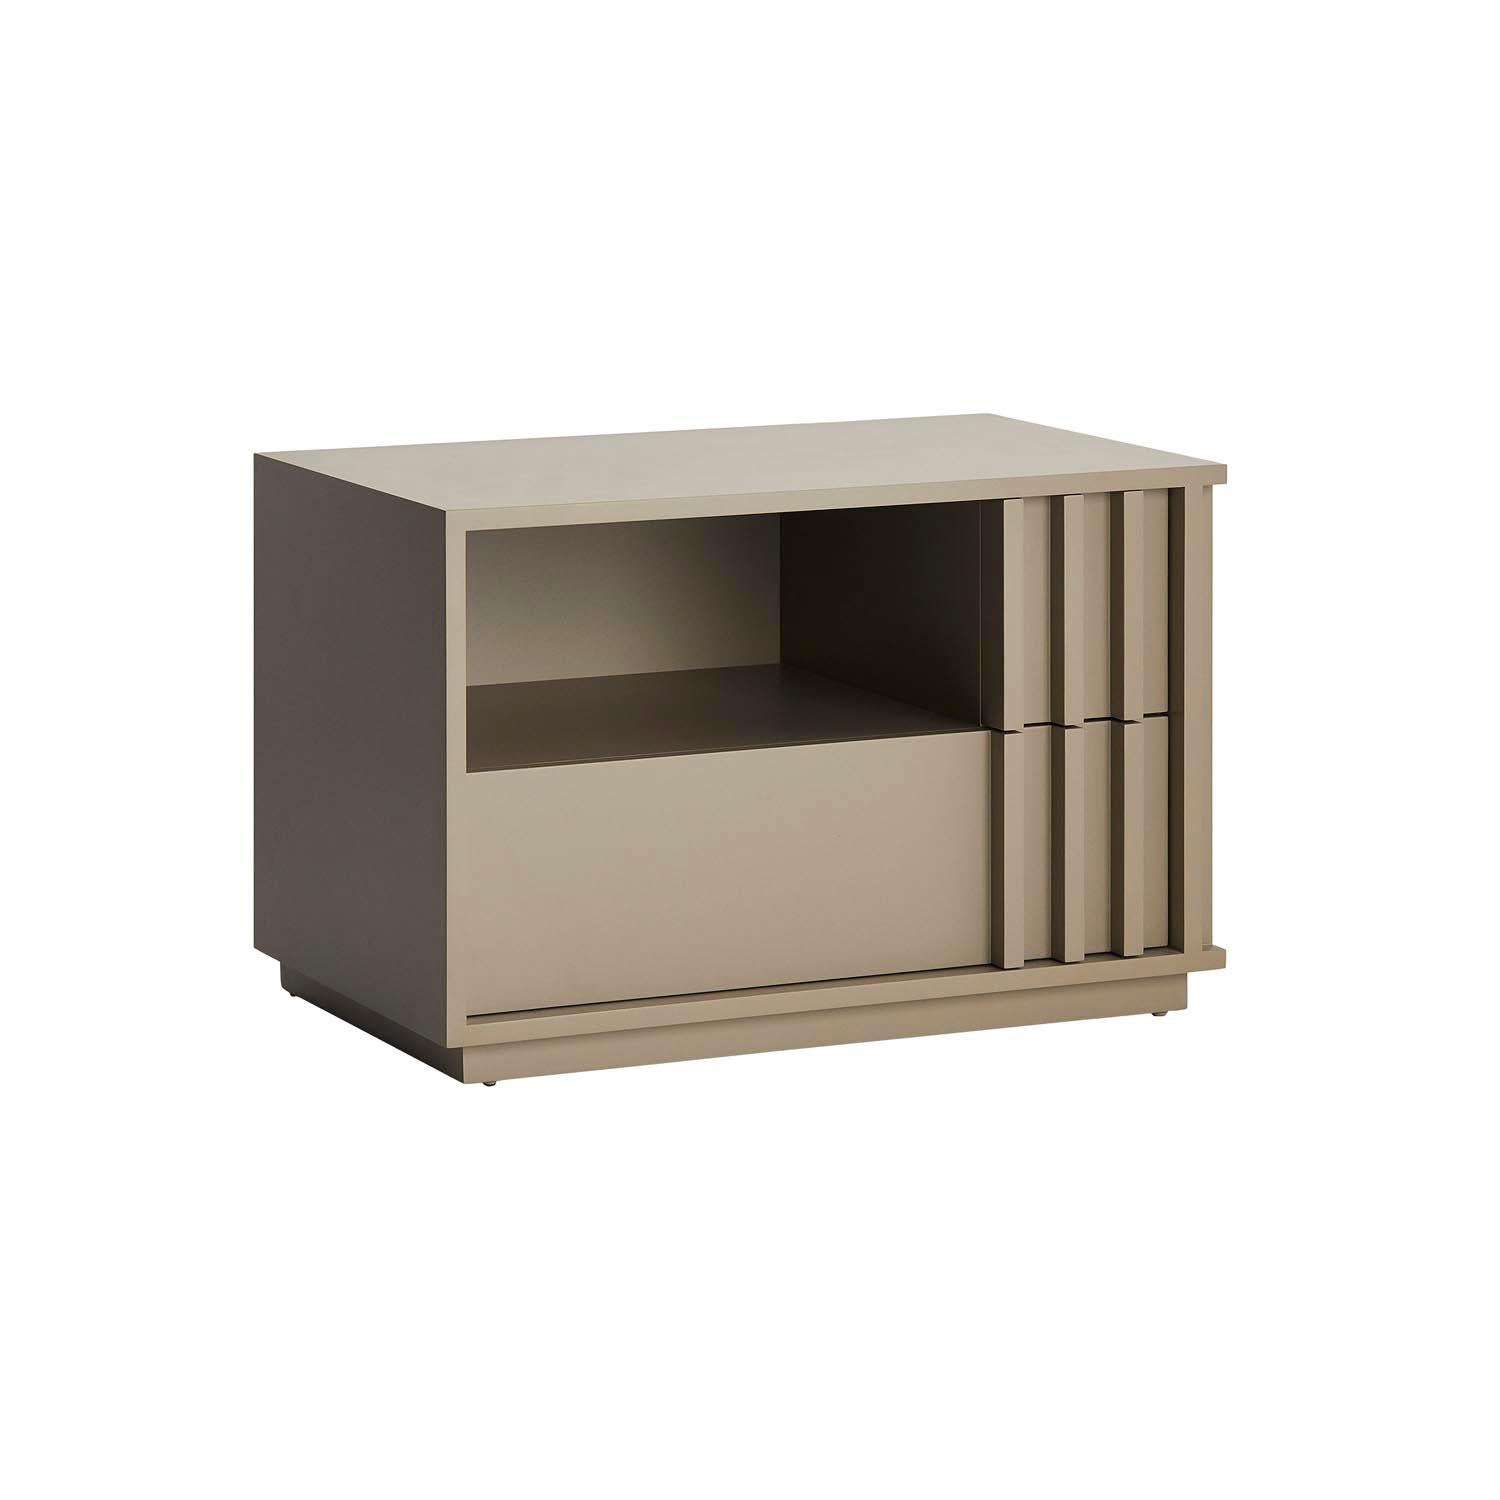 A must-have for any bedroom. Ready to answer all your needs, with a modern design and incomparable quality.
Relevo bedside table has 1 small extra drawer to facilitate the storage and accessibility.

Matte lacquered structure in Taupe color and